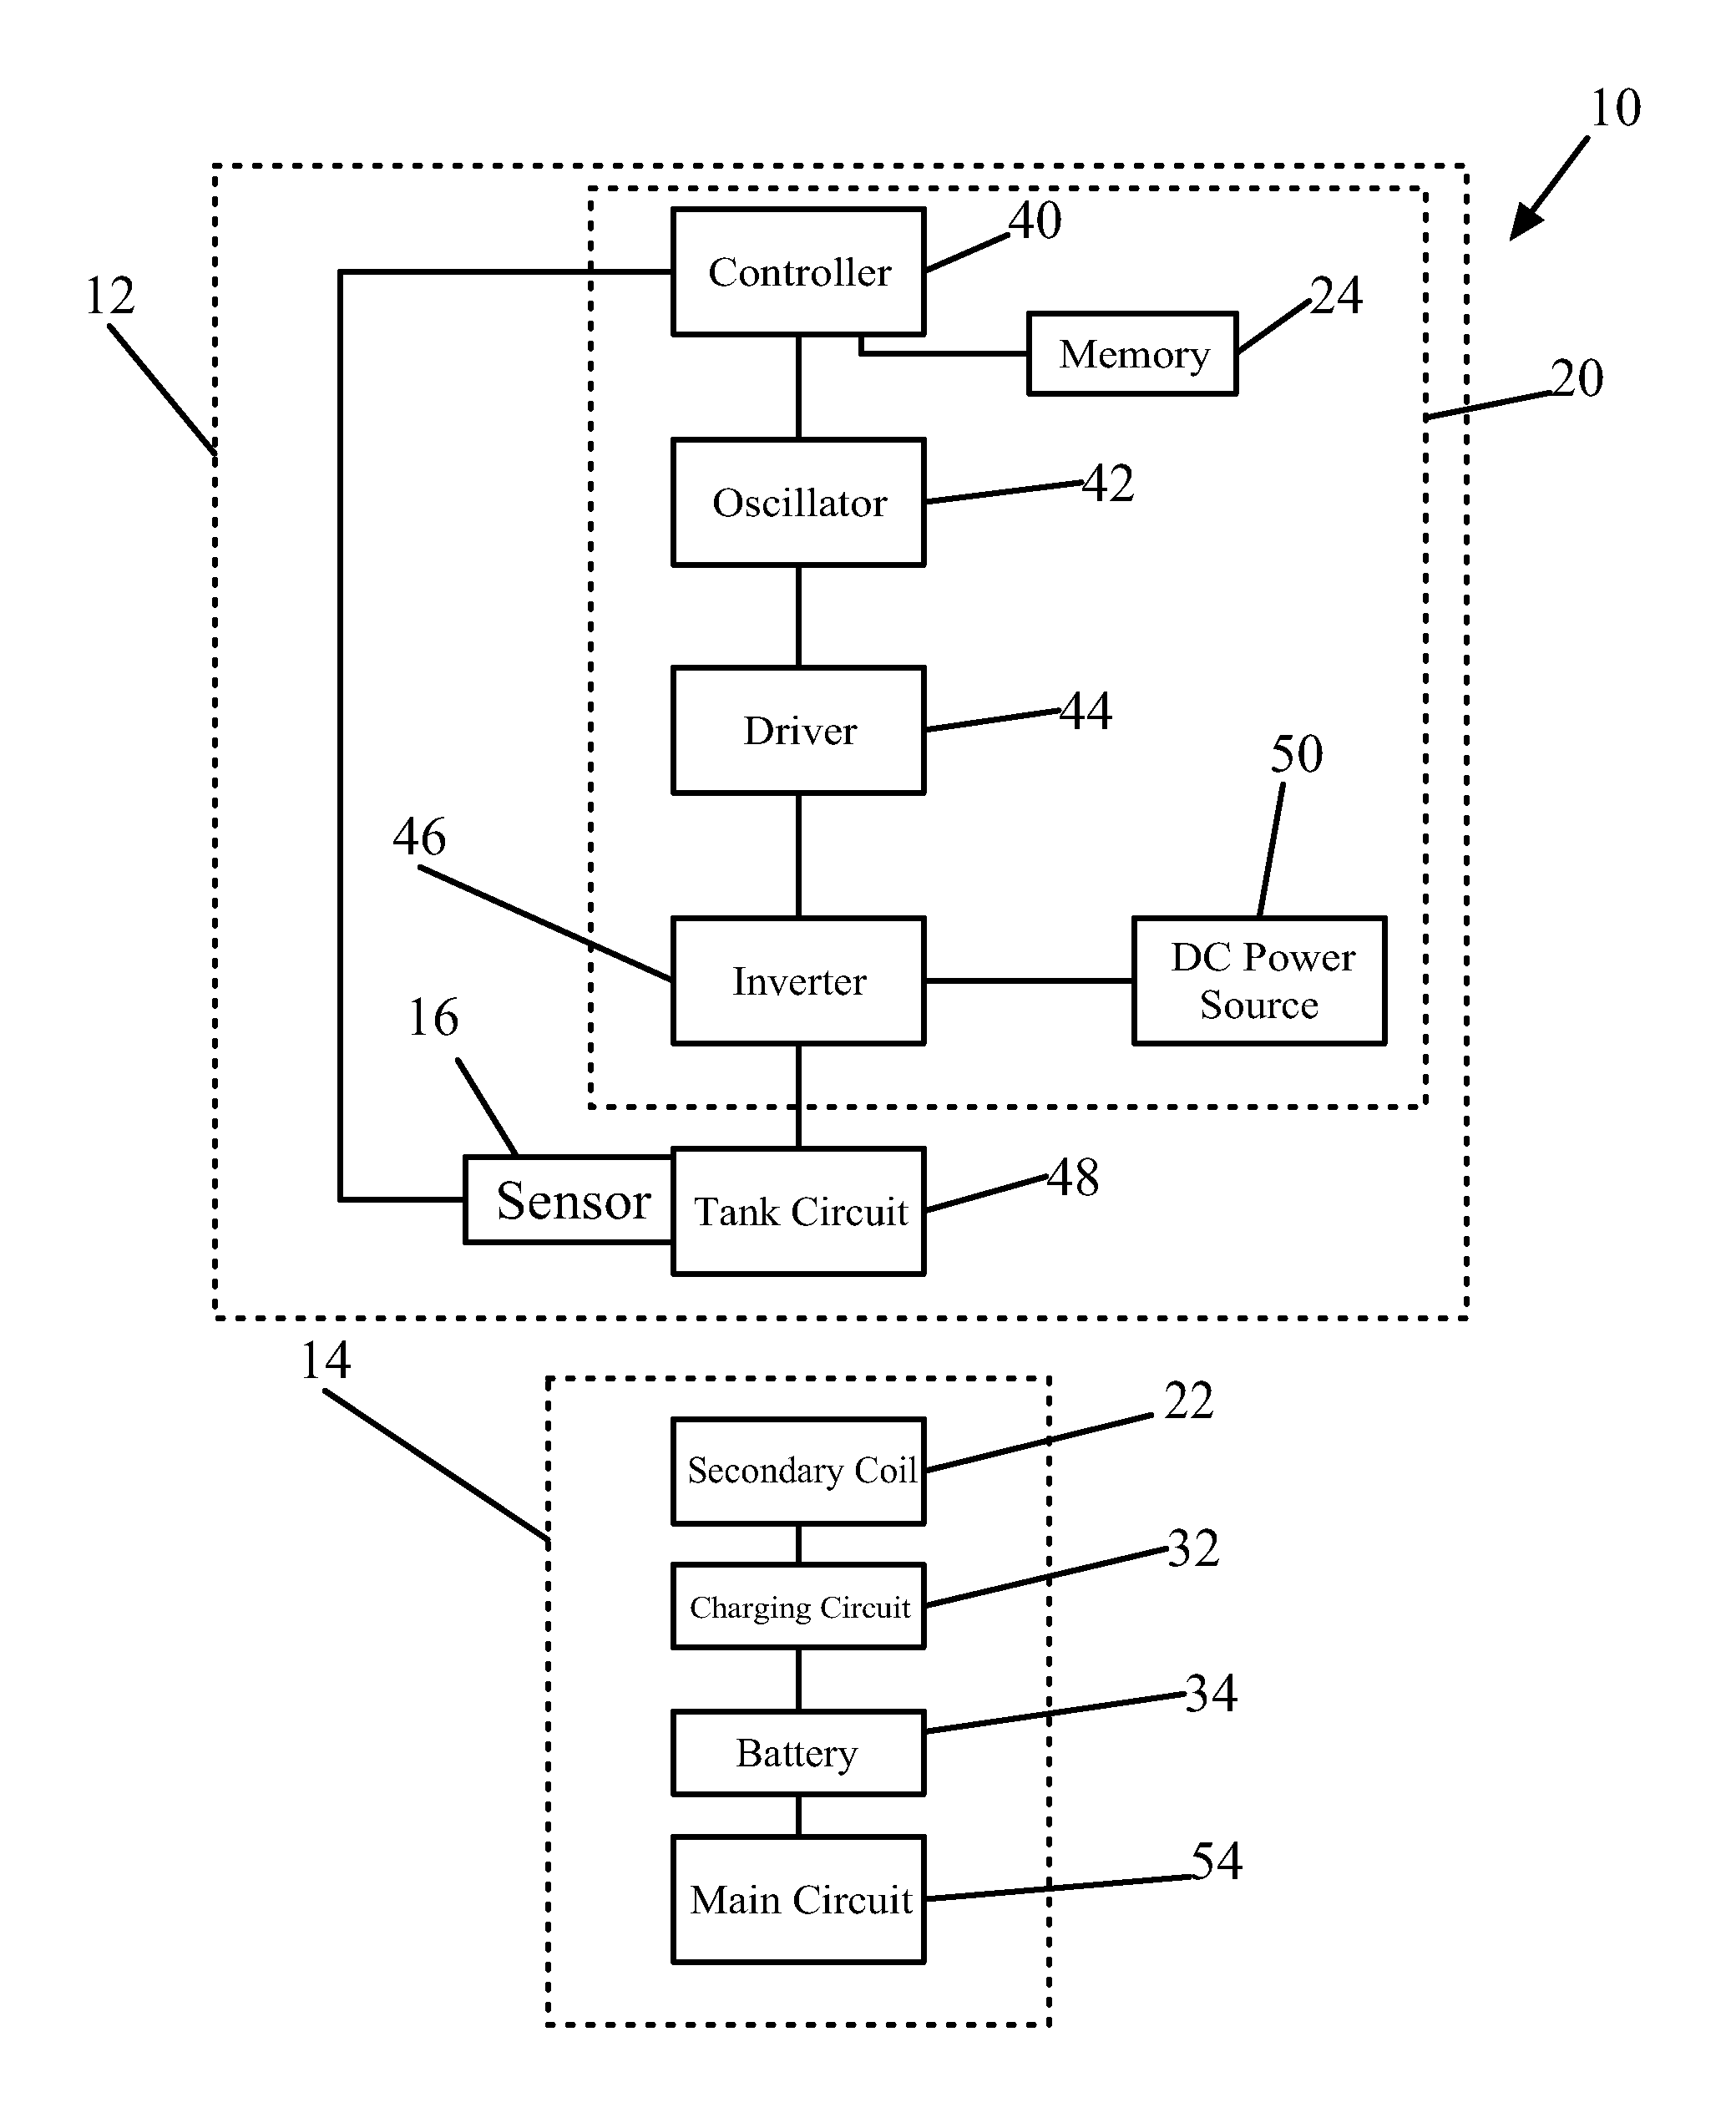 Inductive power supply with device identification